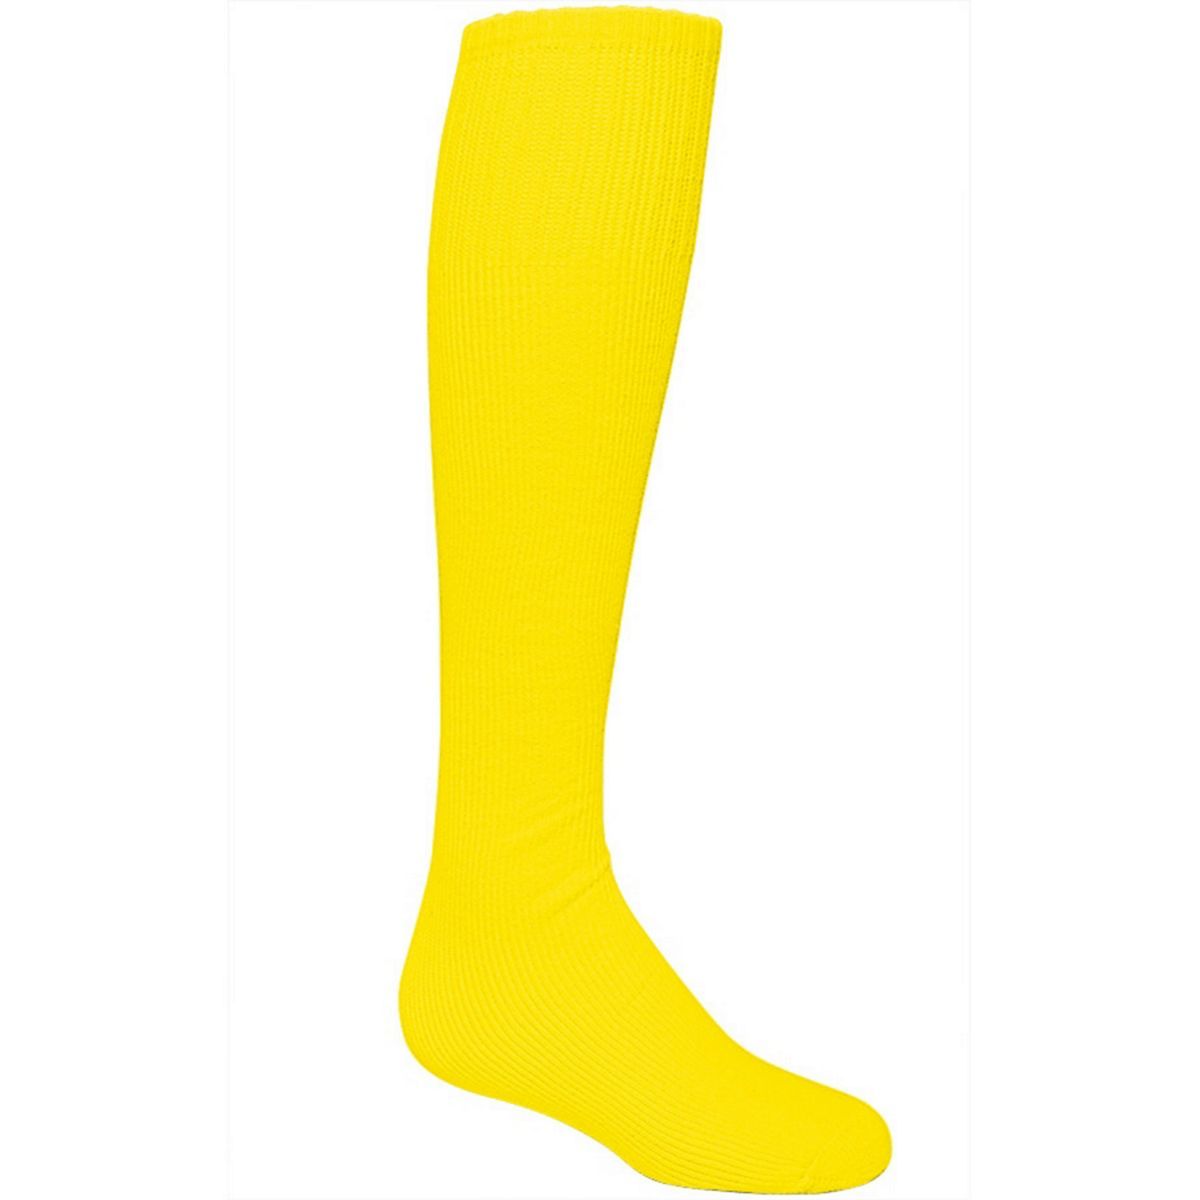 High 5 Athletic  Sock in Power Yellow  -Part of the Accessories, High5-Products, Accessories-Socks product lines at KanaleyCreations.com